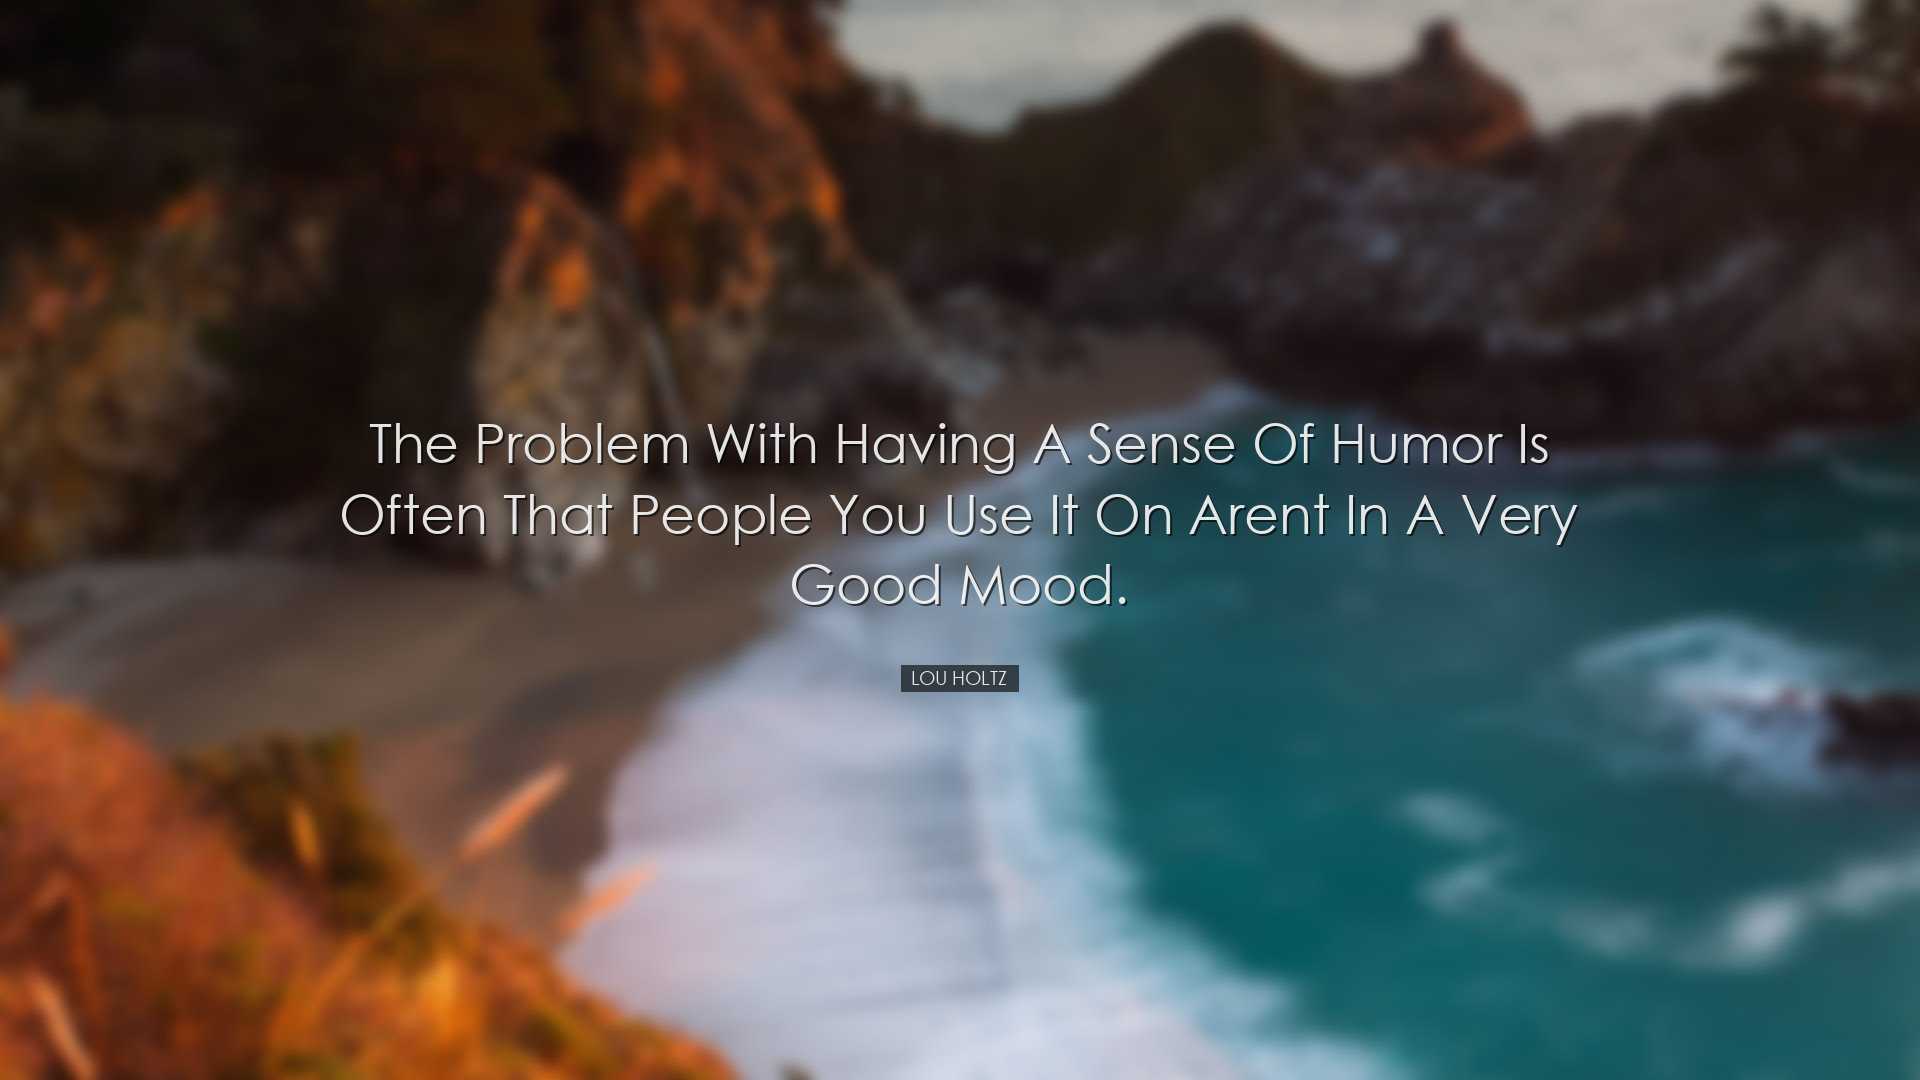 The problem with having a sense of humor is often that people you